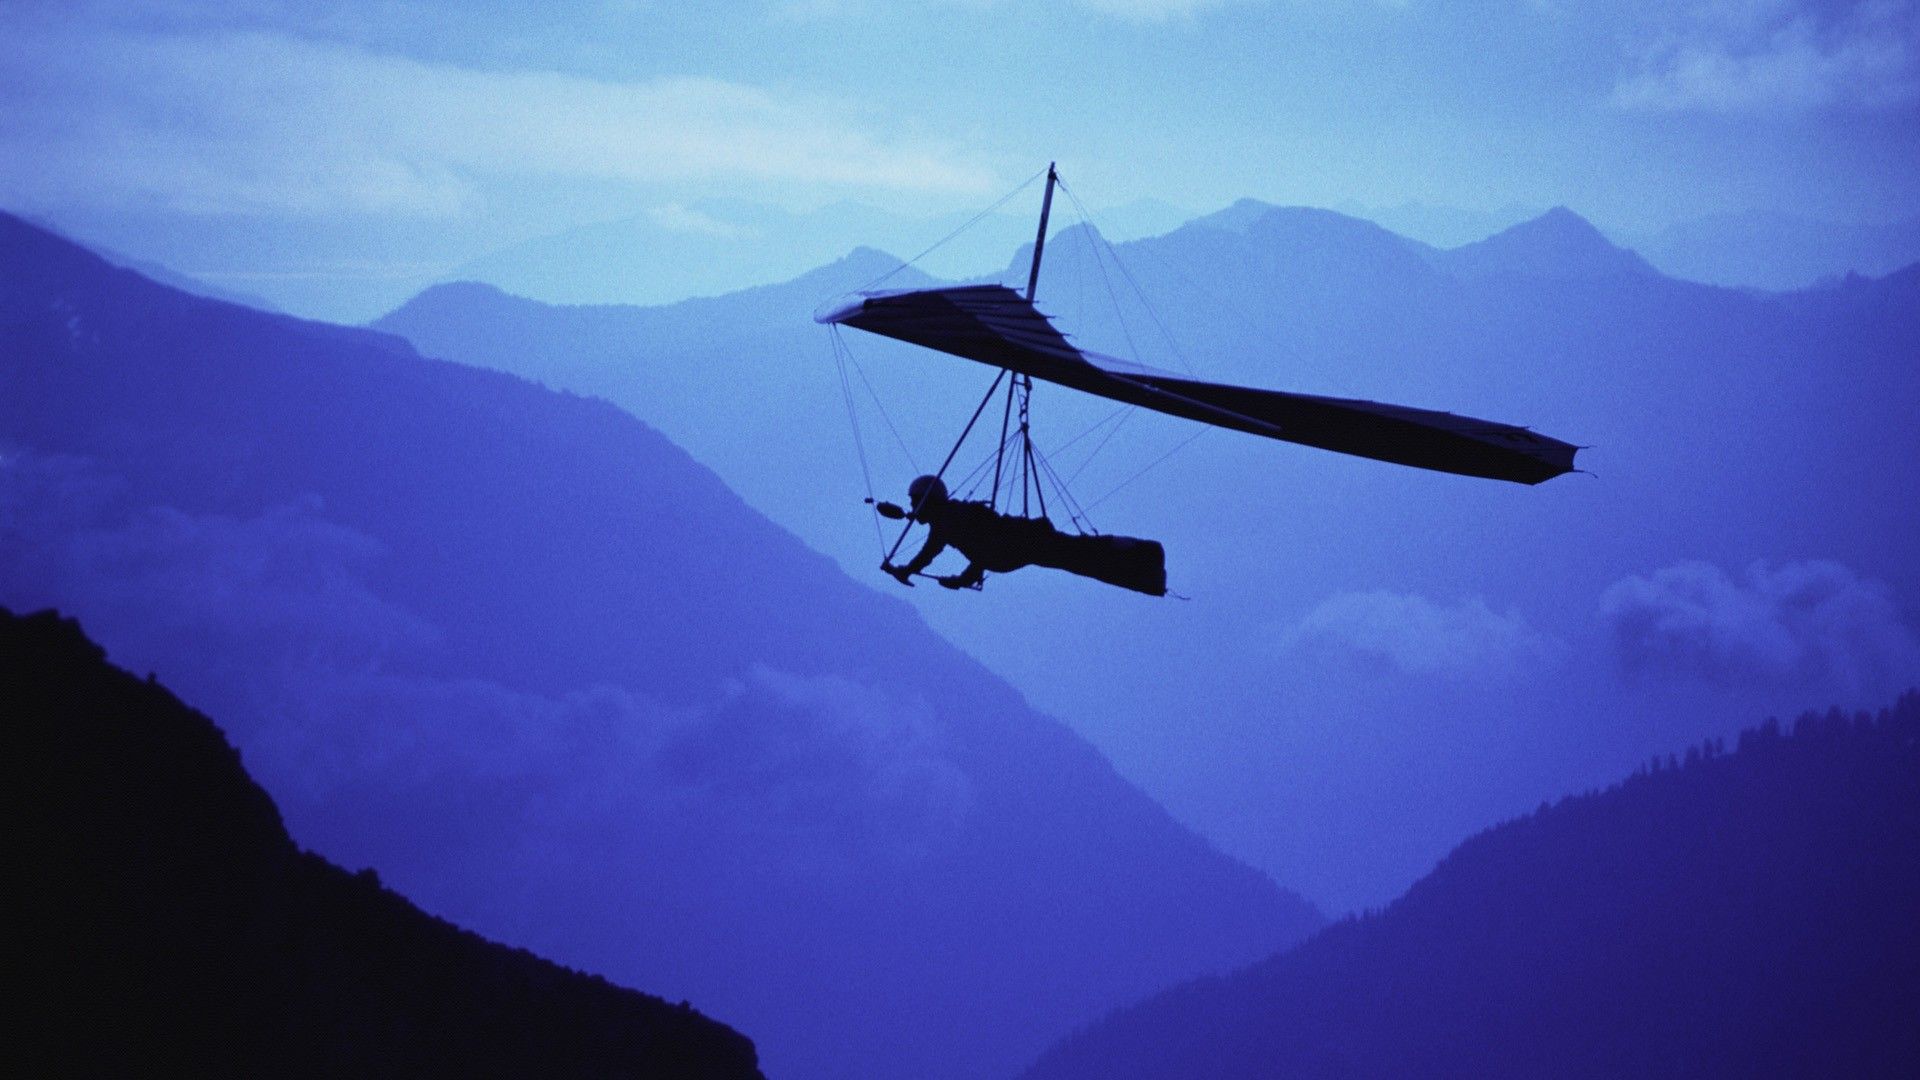 Image Detail For Hang Glider Over The Mountains Wallpaper To